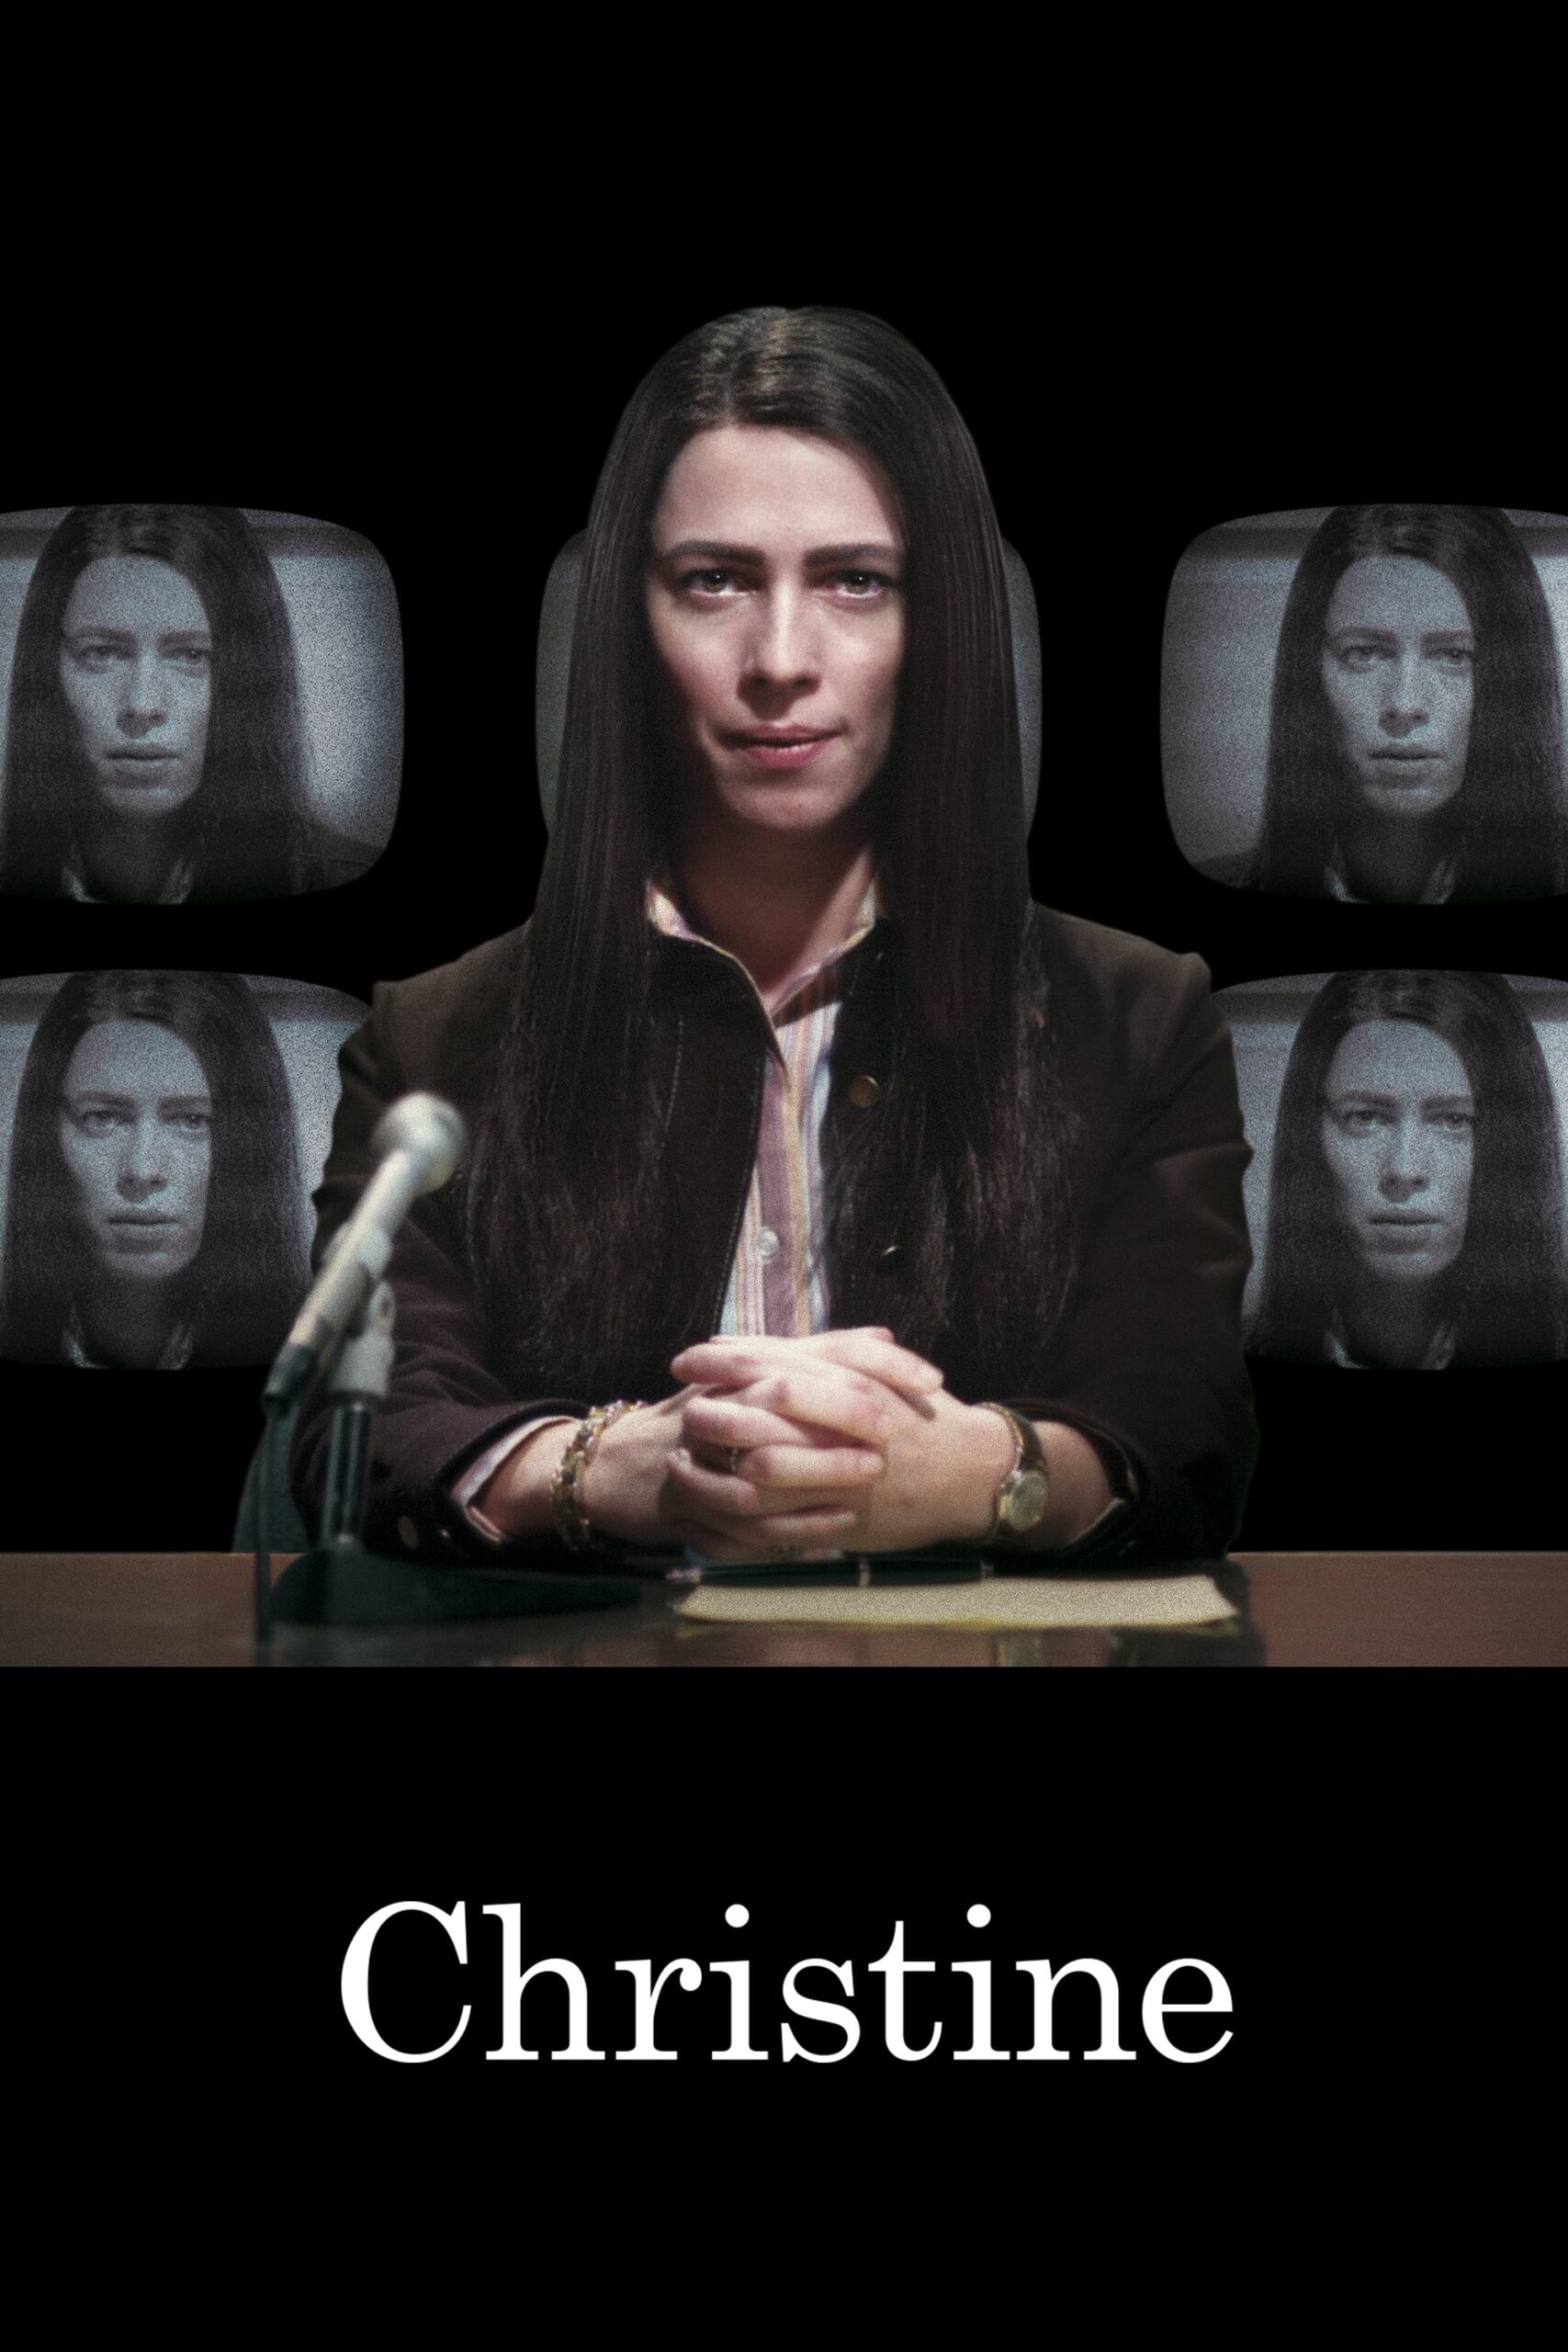 Poster for the movie "Christine"